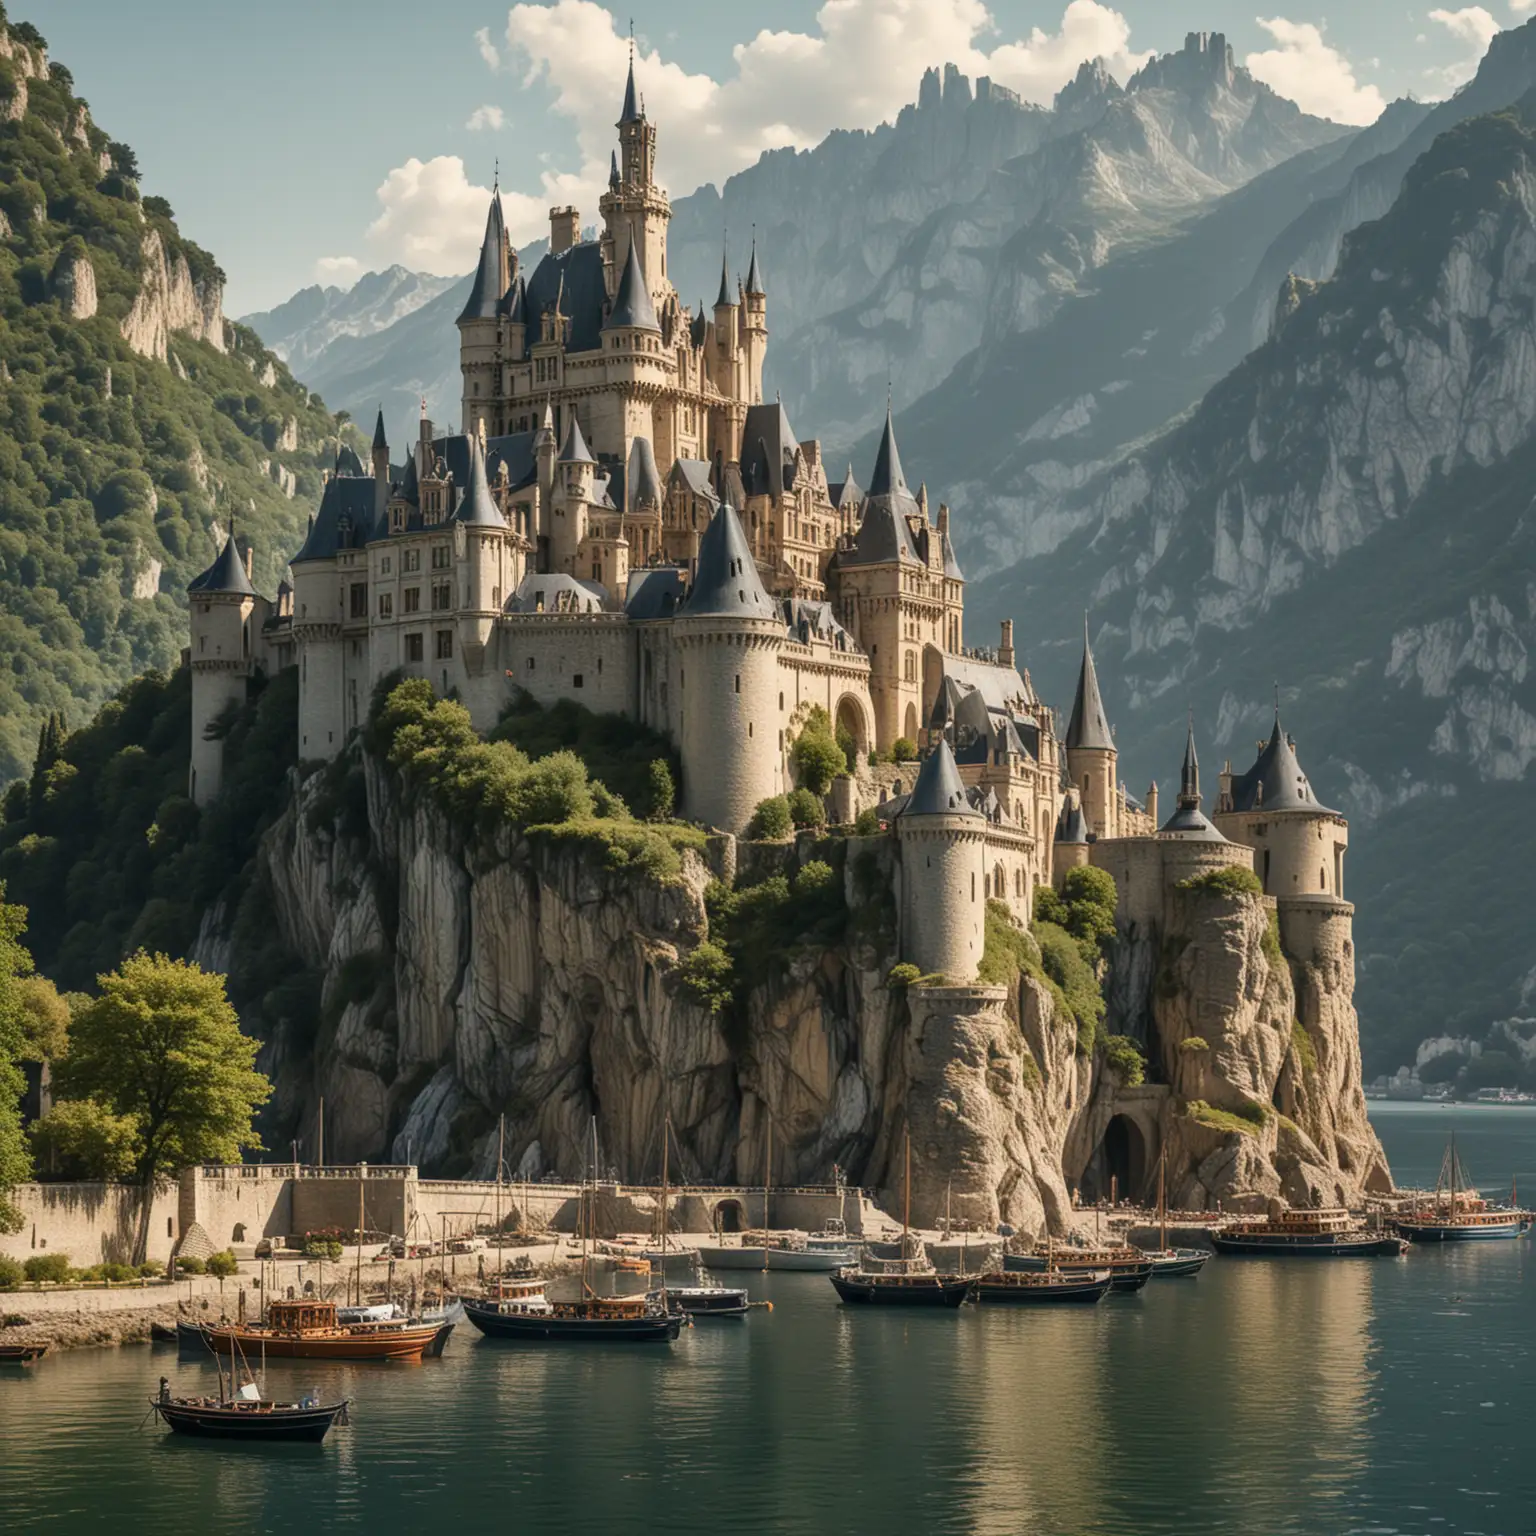 french castle on mountains, large towers, surrounded by water and ships